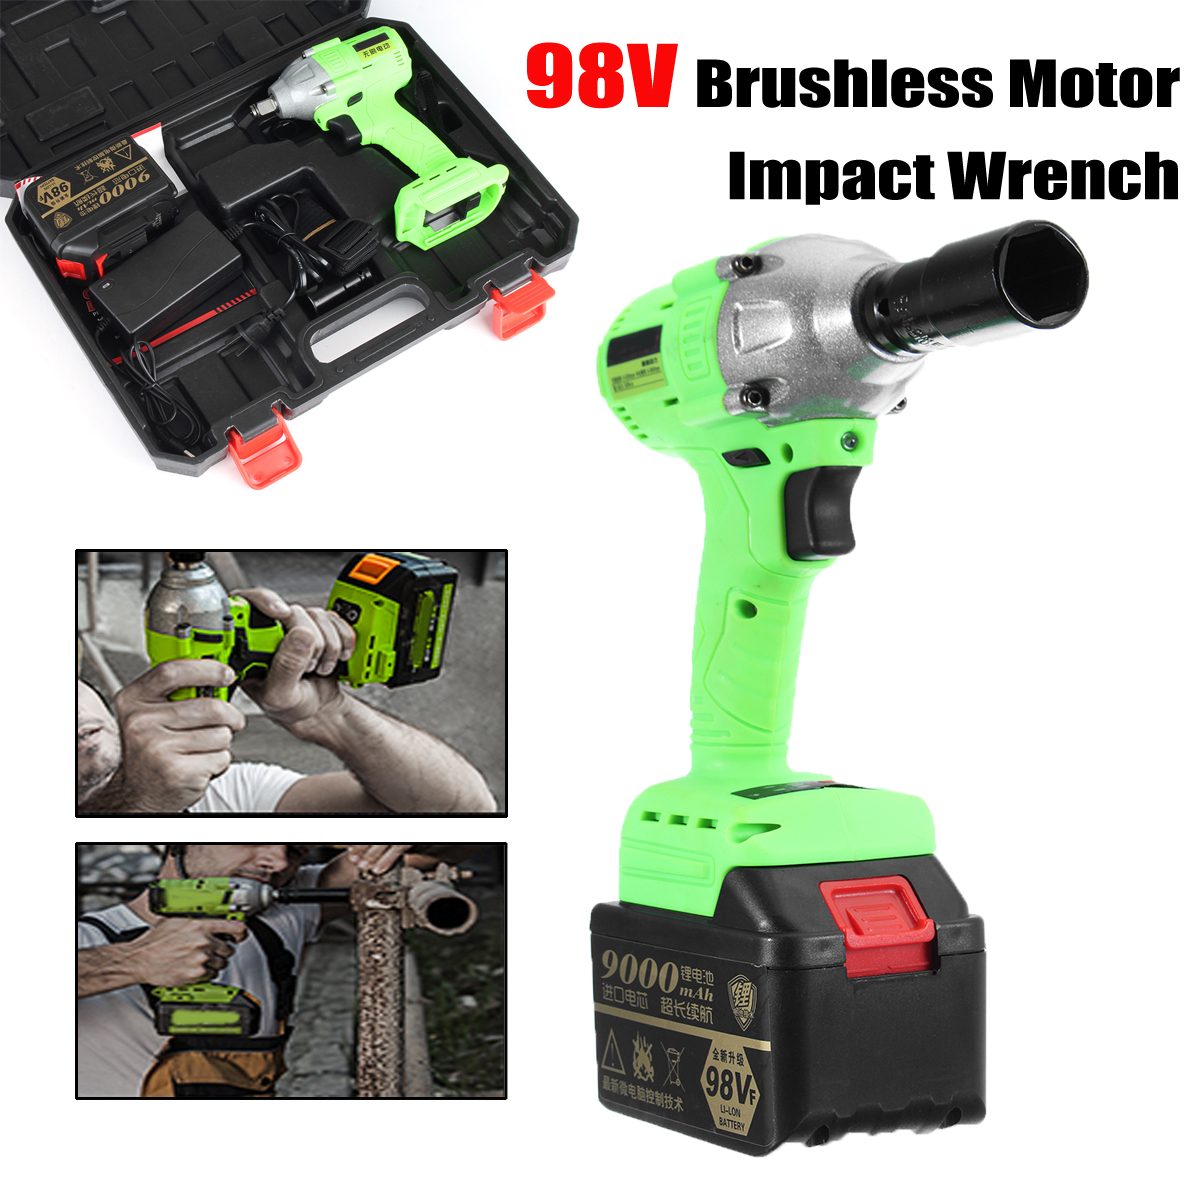 98V-9000mAh-Cordless-Lithium-Ion-Electric-Impact-Wrench-Power-Wrenche-Brushless-Motor-1270466-3